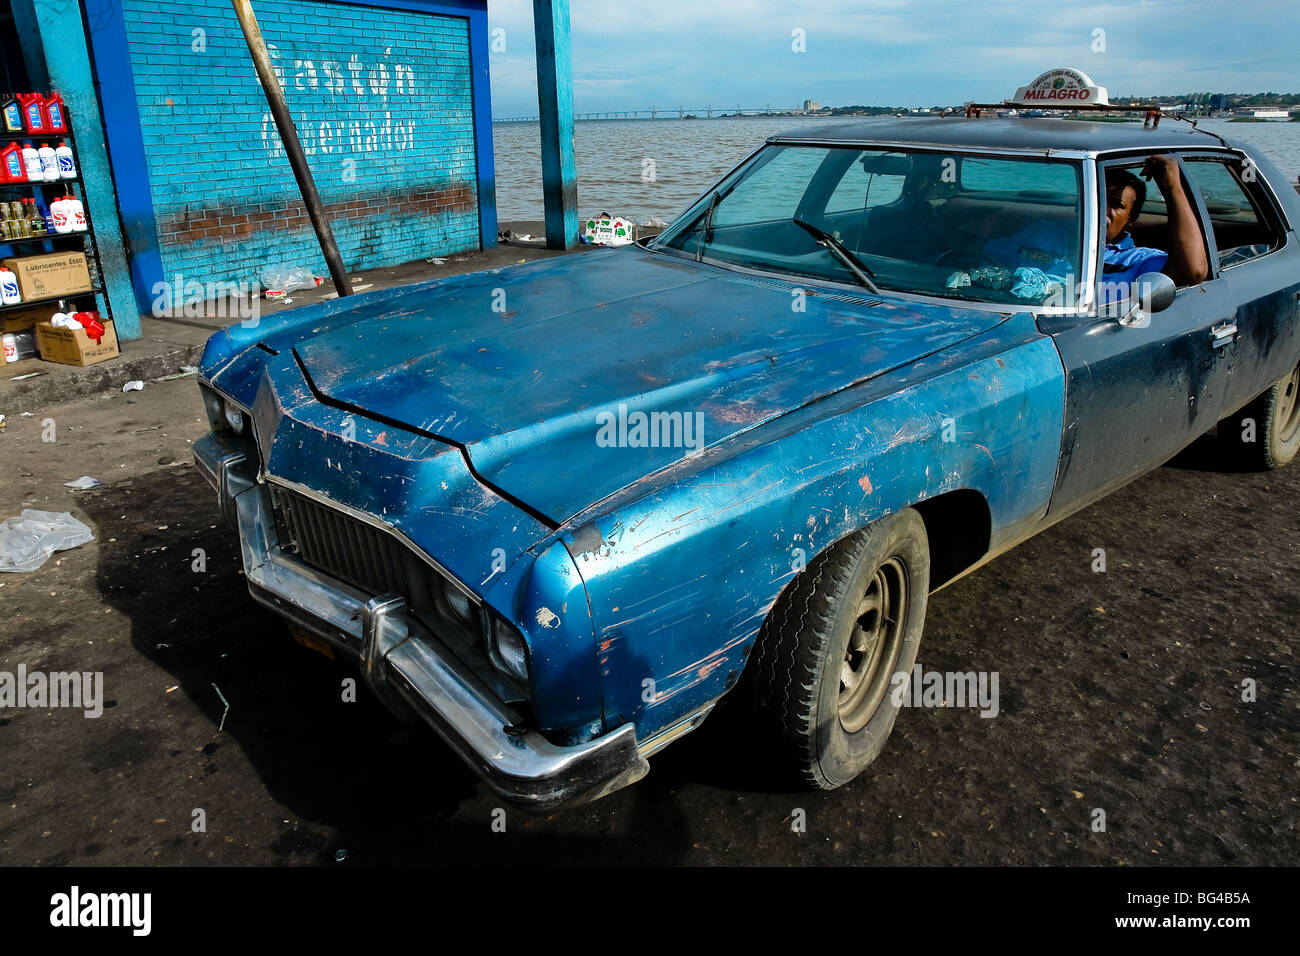 A scratched American classic car from 1970s, used as a shared taxi, waiting on the stand in Maracaibo, Venezuela. Stock Photo